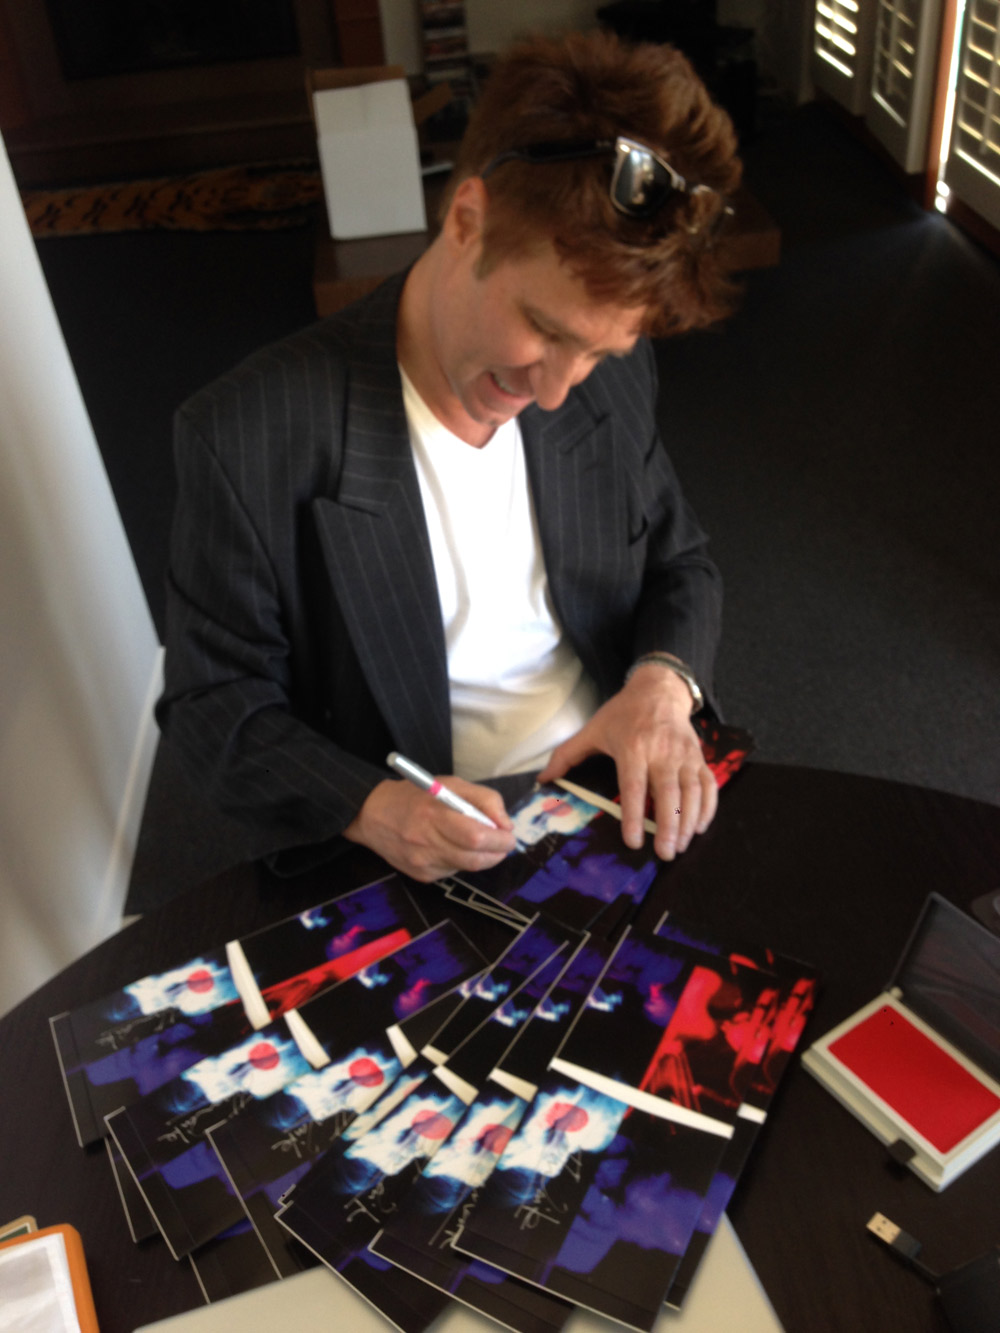 John signing the latest batch of "John Waite - BEST" CDs purchased by fans in the official store.